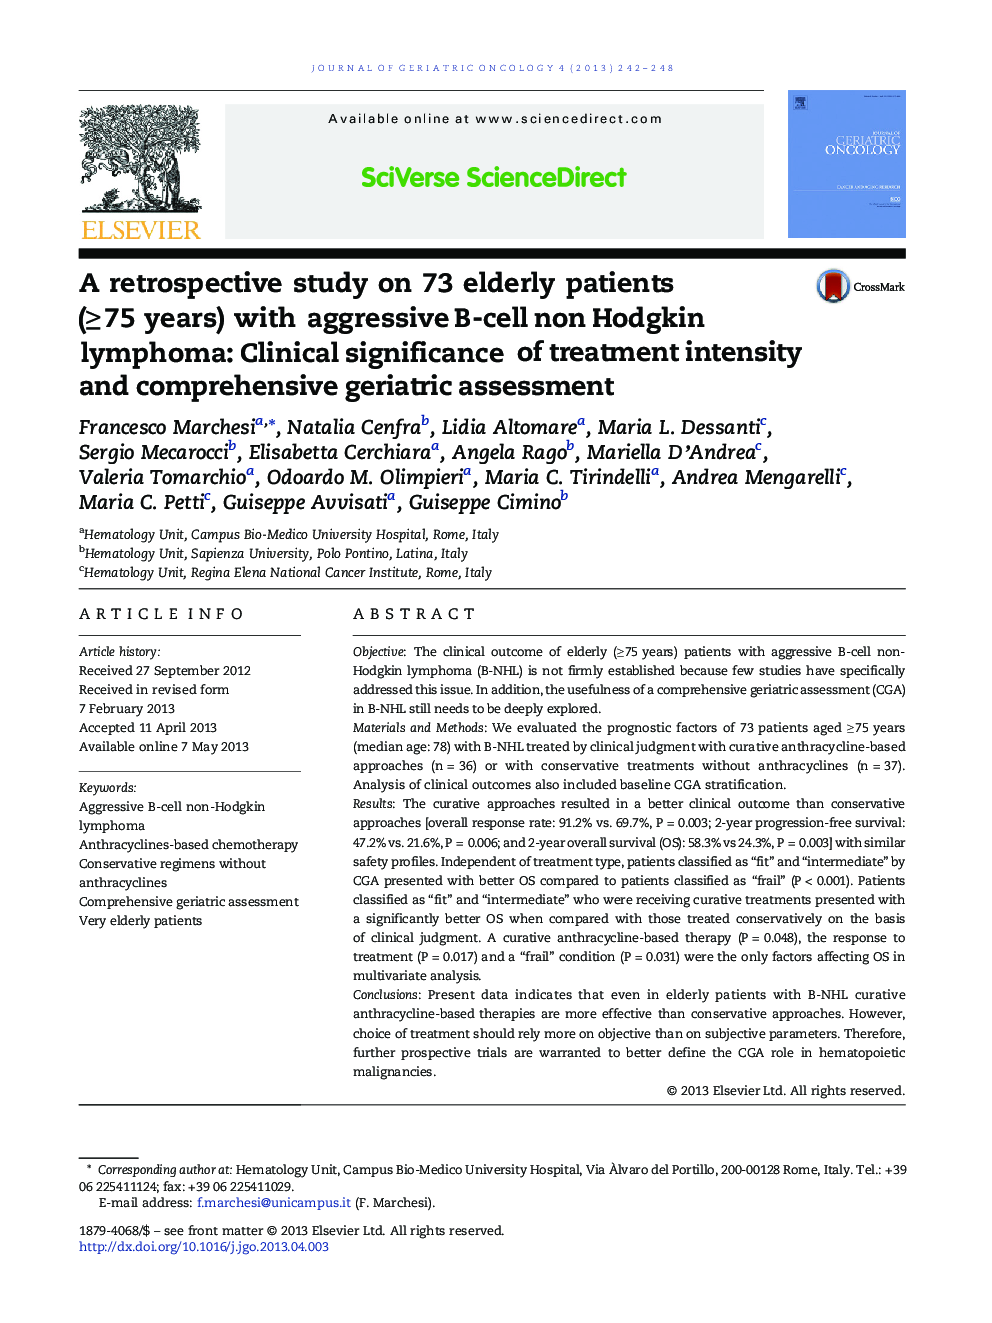 A retrospective study on 73 elderly patients (≥ 75 years) with aggressive B-cell non Hodgkin lymphoma: Clinical significance of treatment intensity and comprehensive geriatric assessment